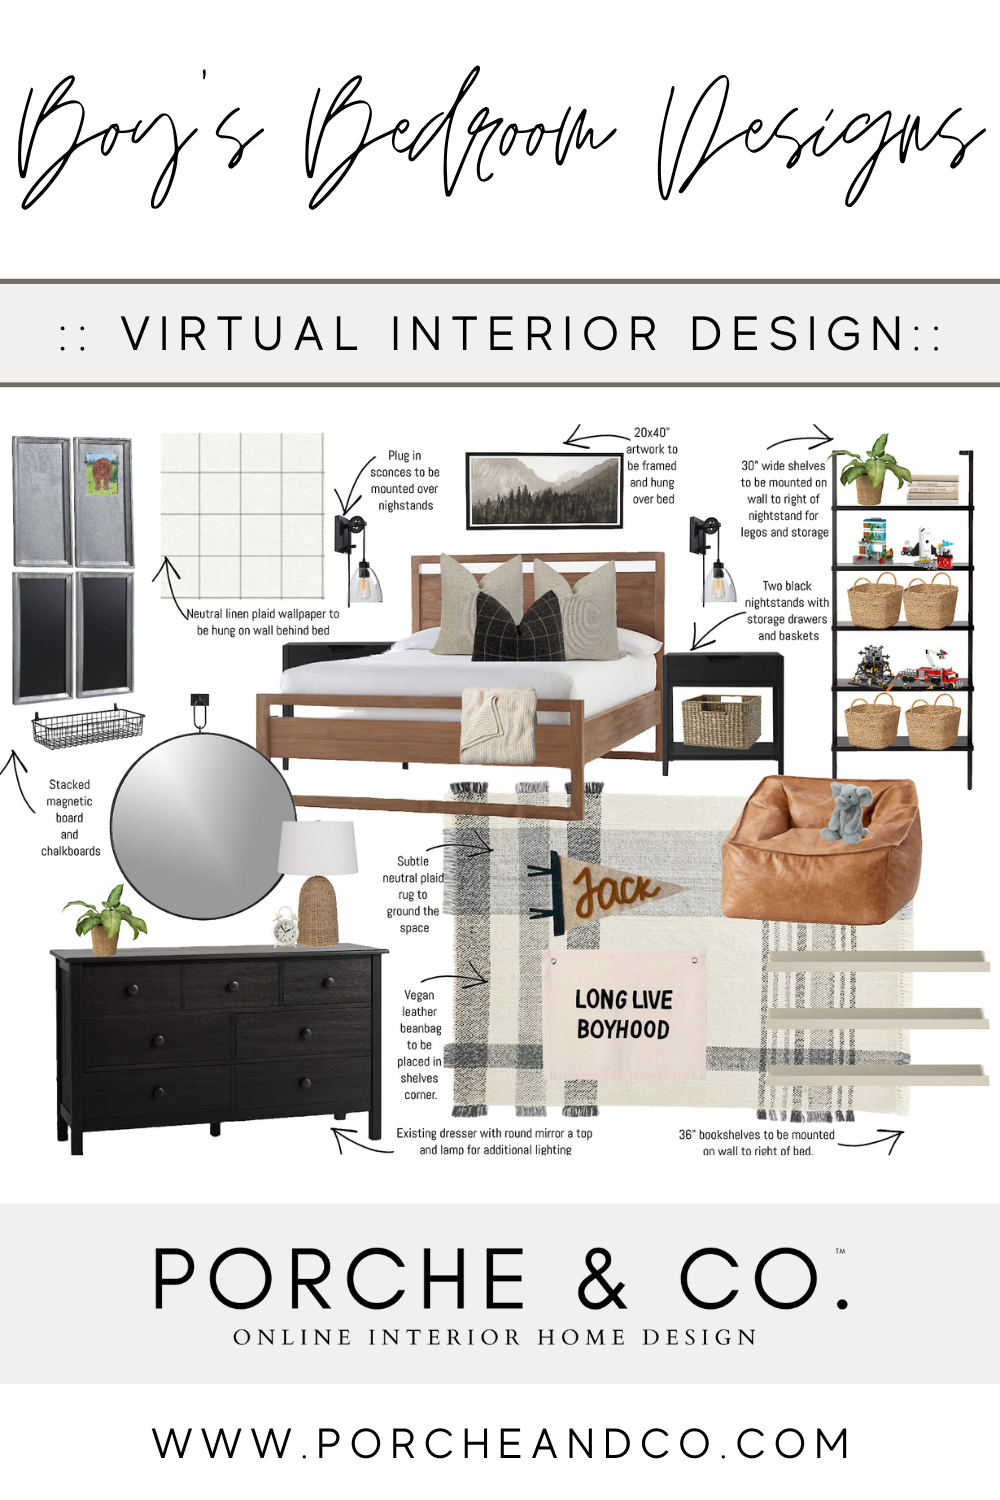 Designs of the Week :: Modern Classic Boy's Bedroom Designs — Porche & Co.